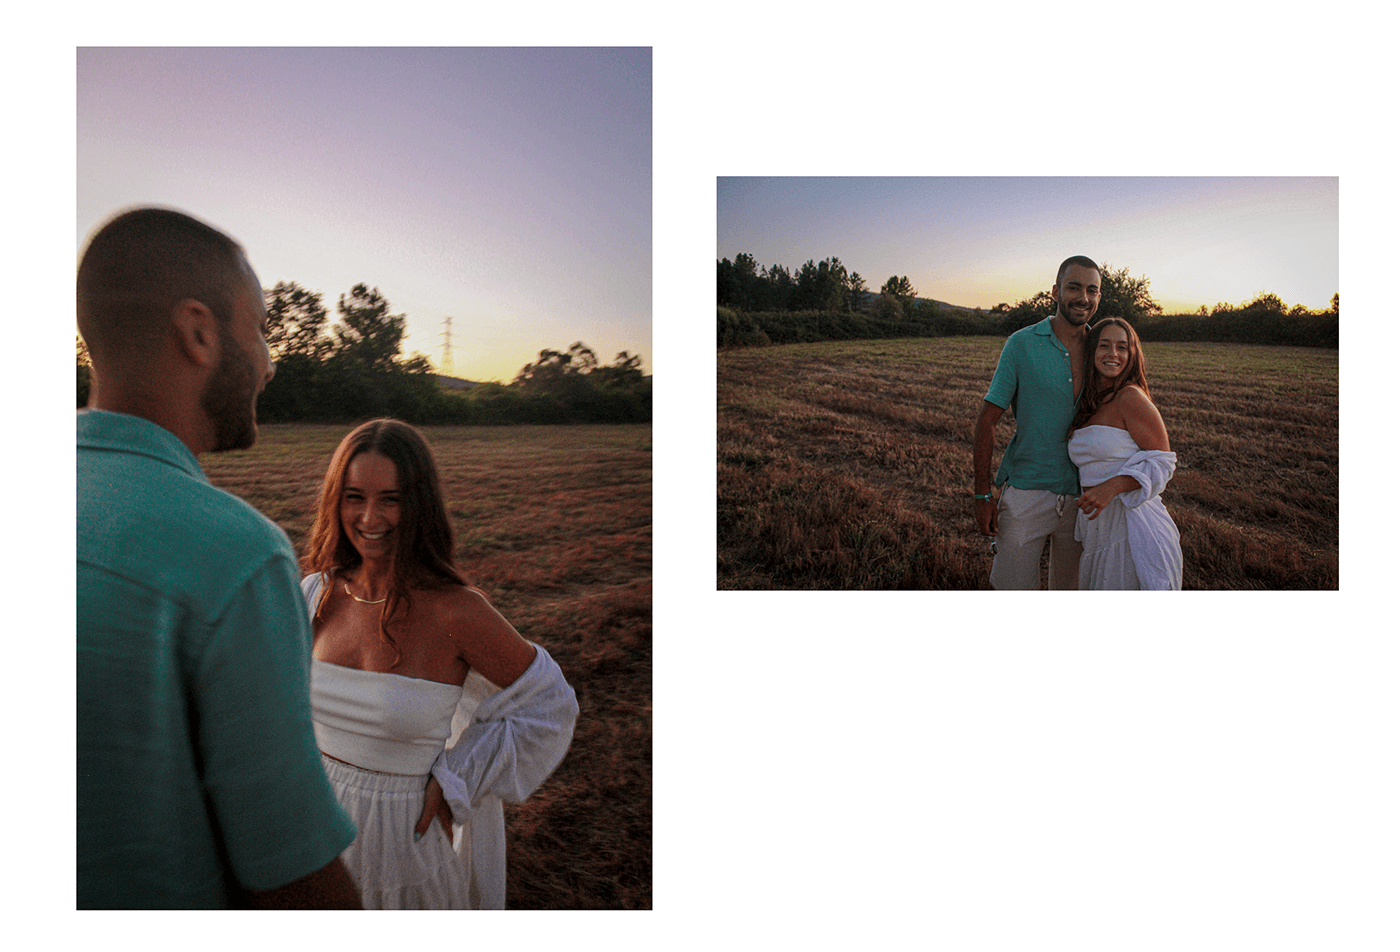 couple photography sunset rural portrait intimacy Lovers Blurry sequence movment